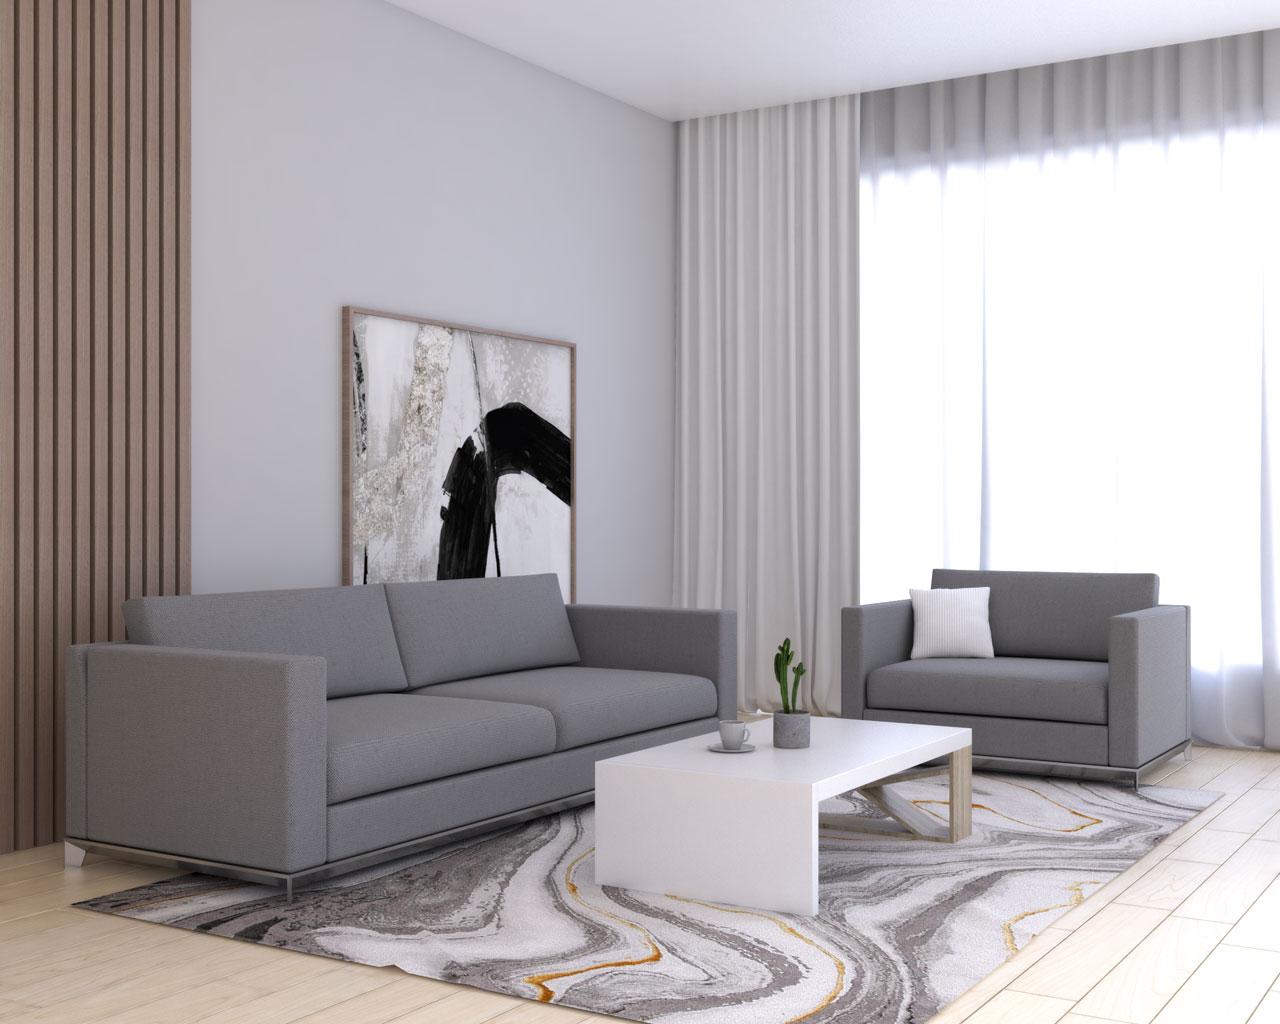 White curtains with gray sofa